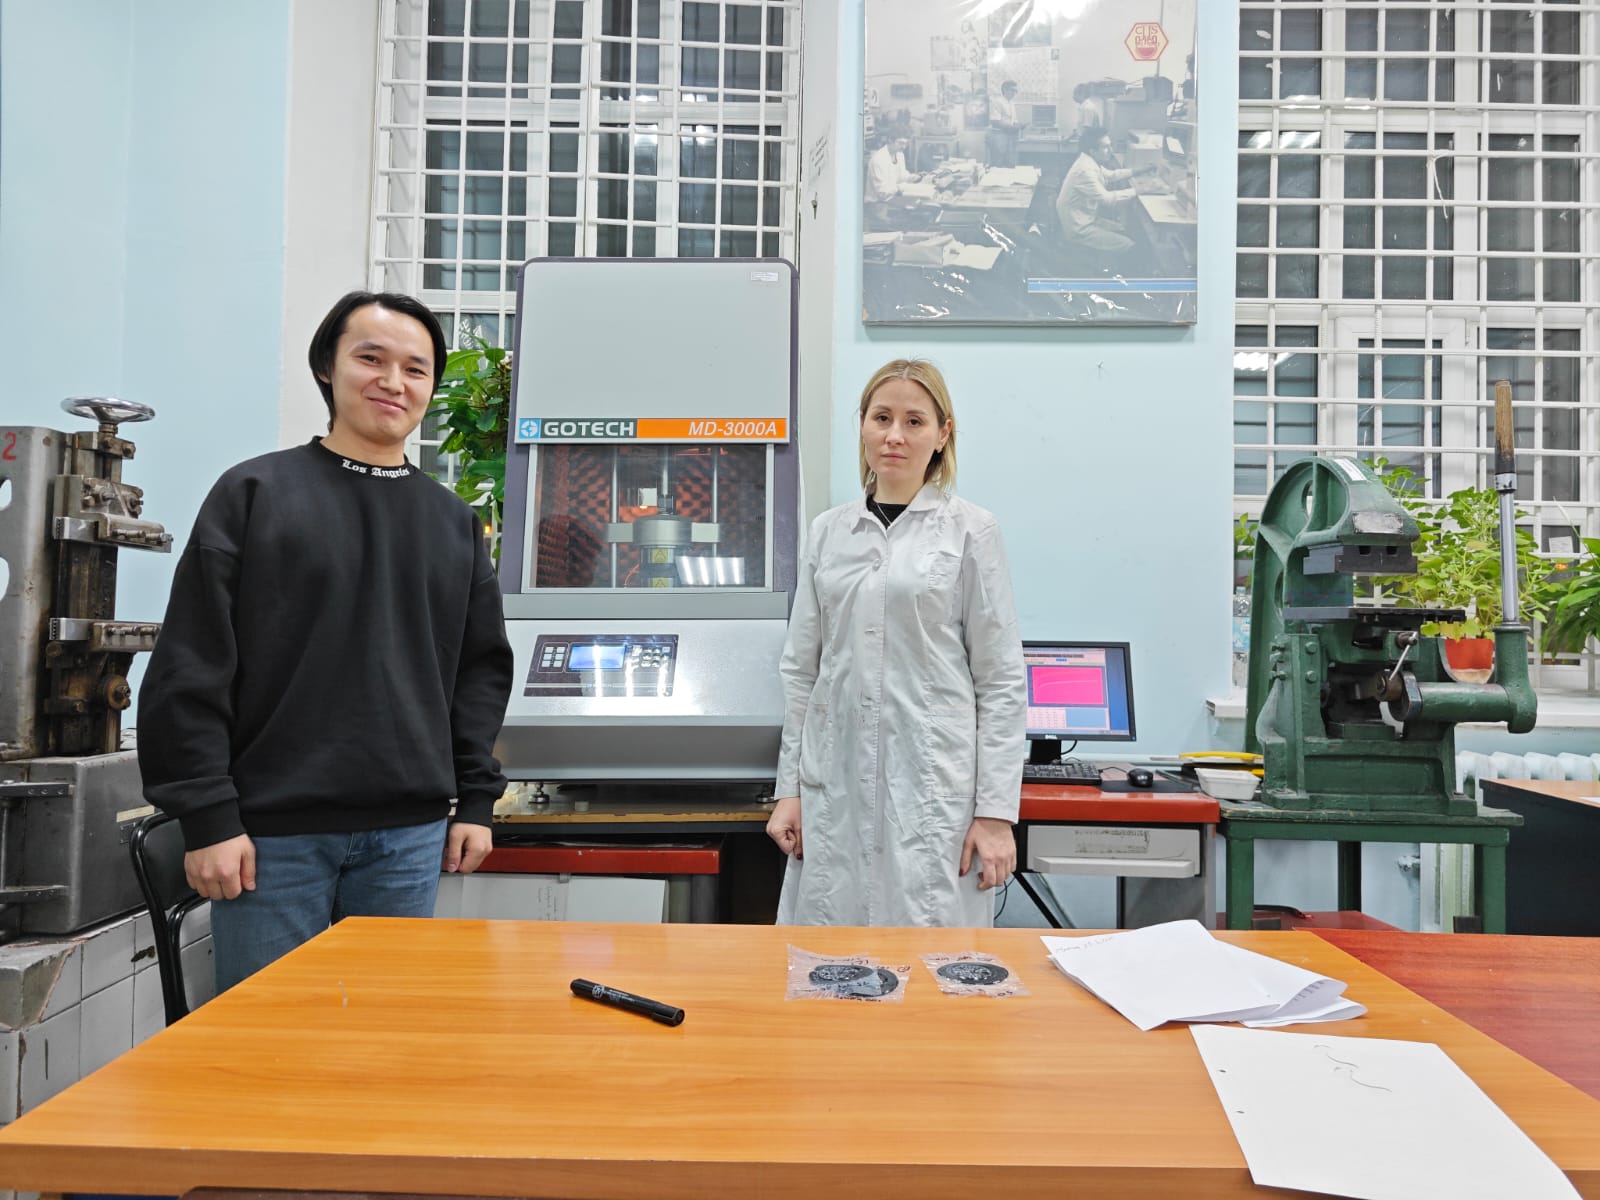 Research work at the Kazan National Research Technological University